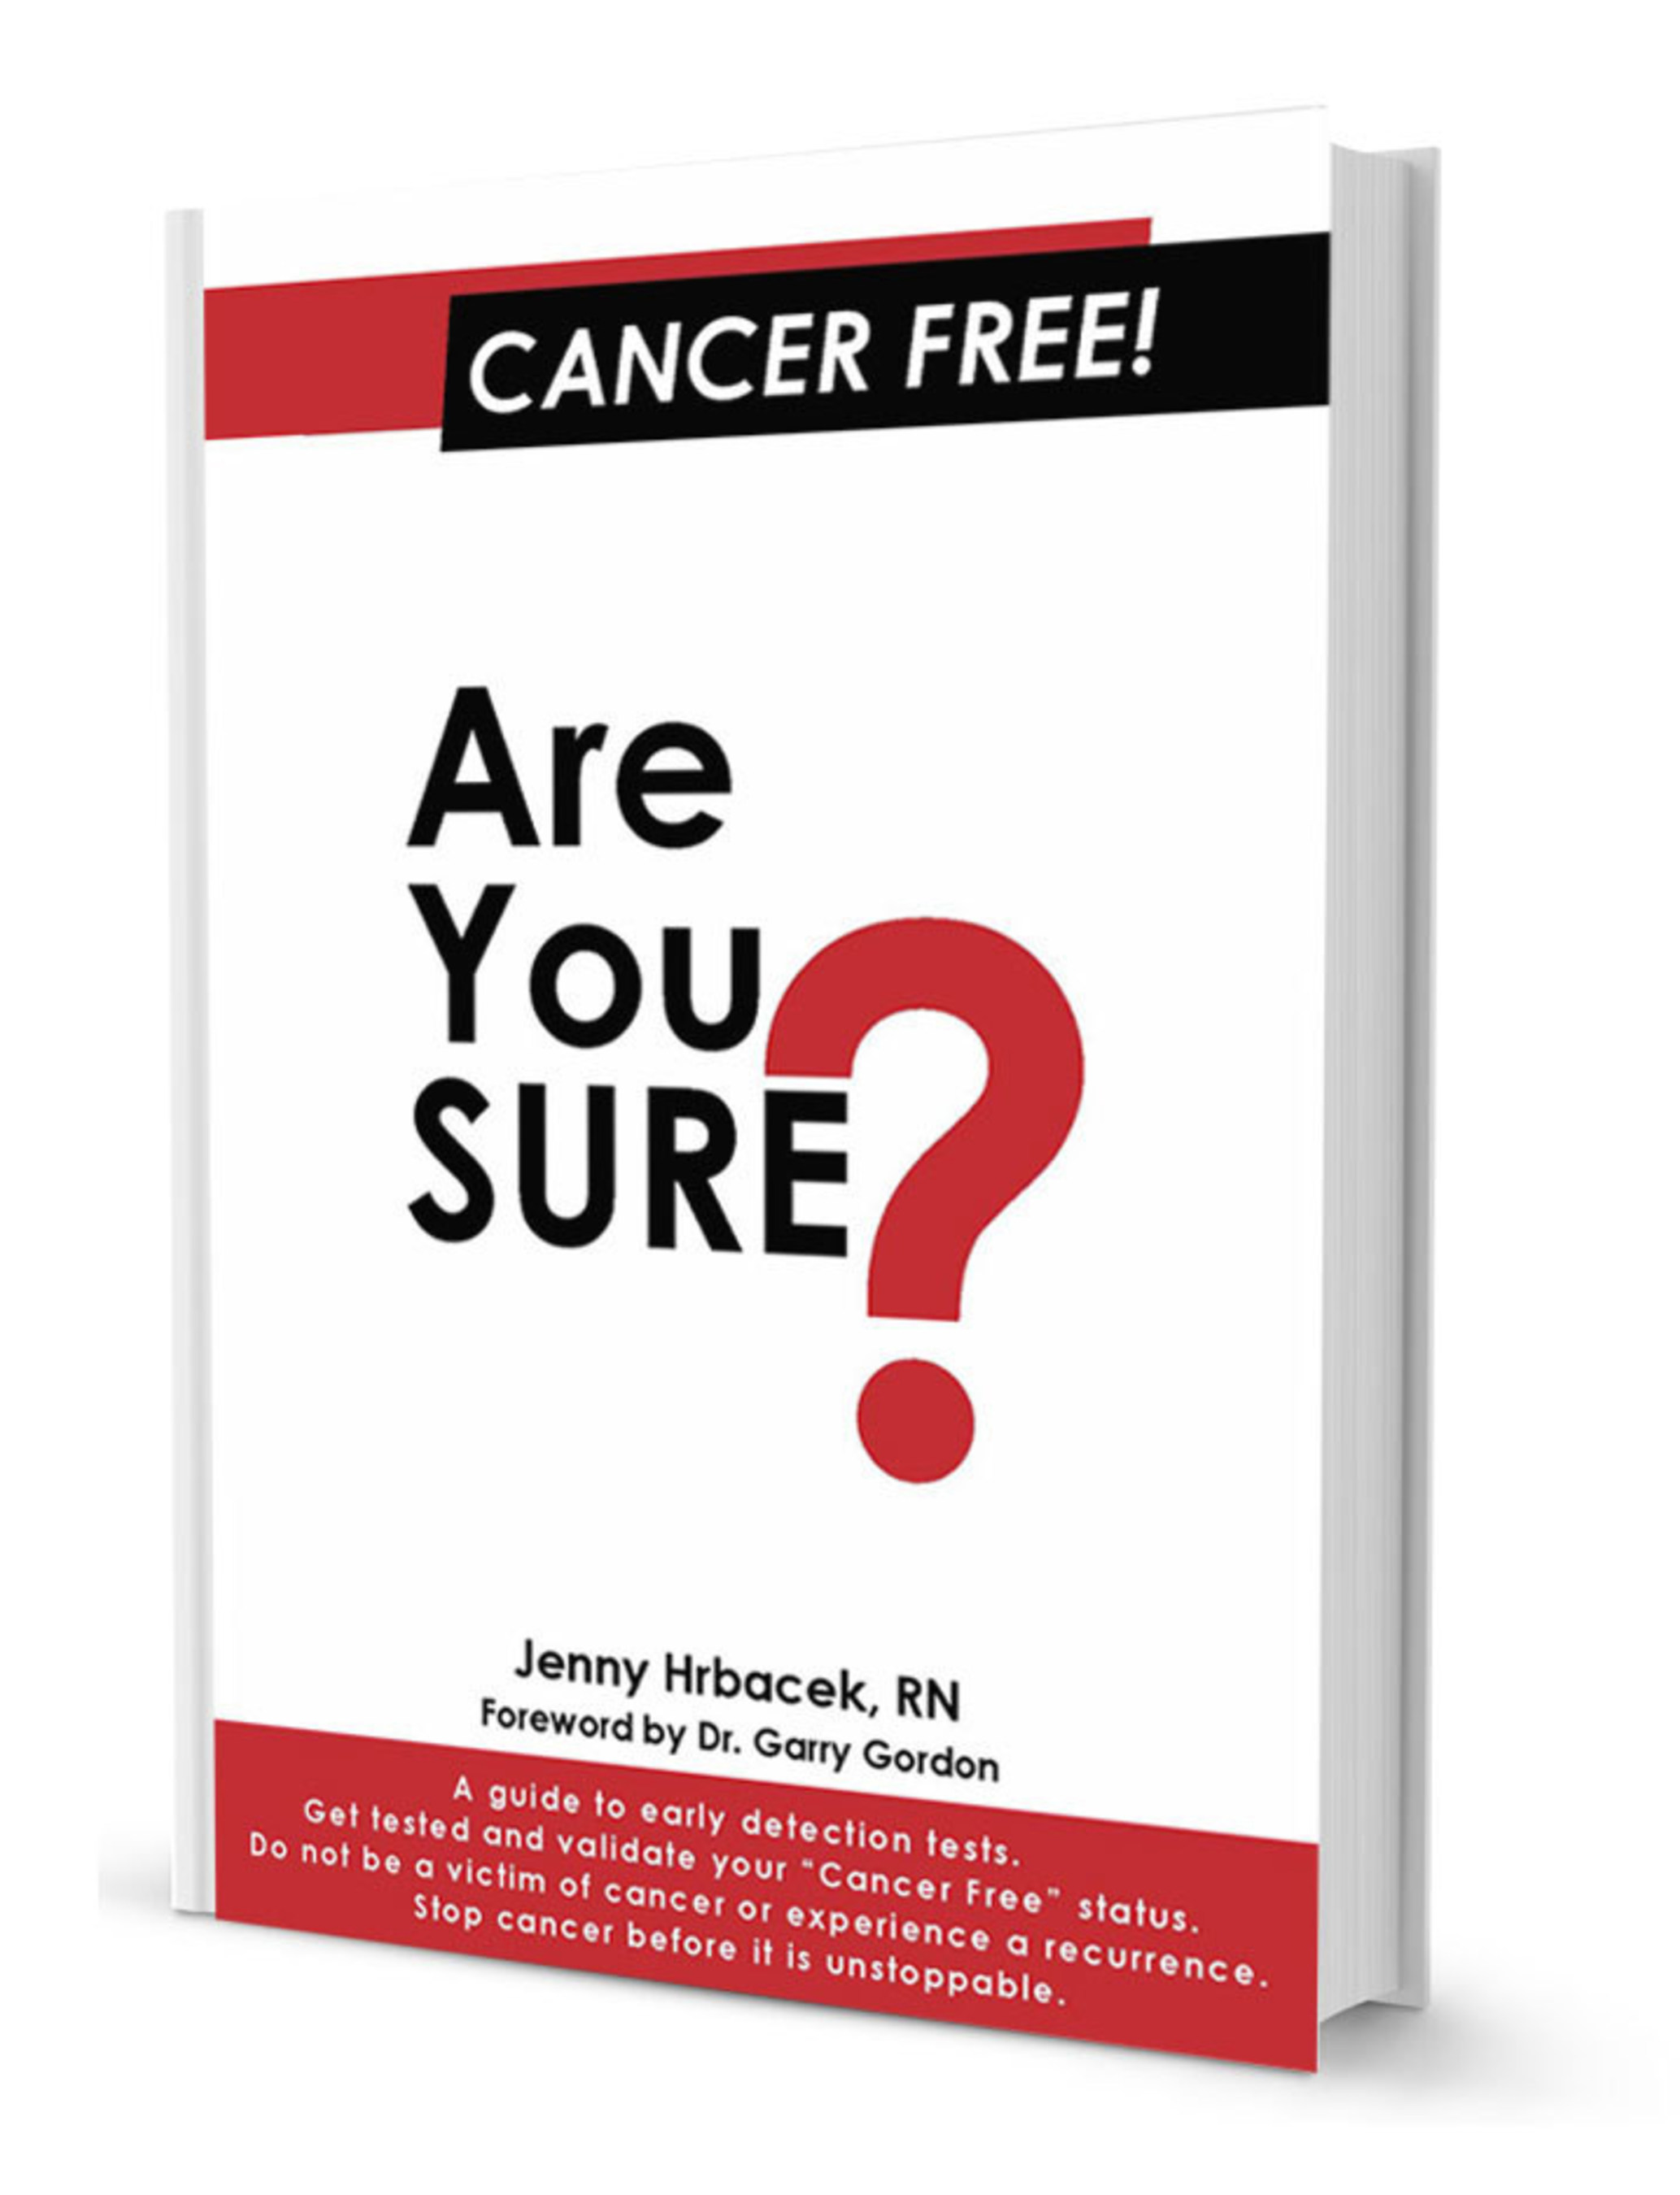 Book: Cancer Free! Are You SURE?